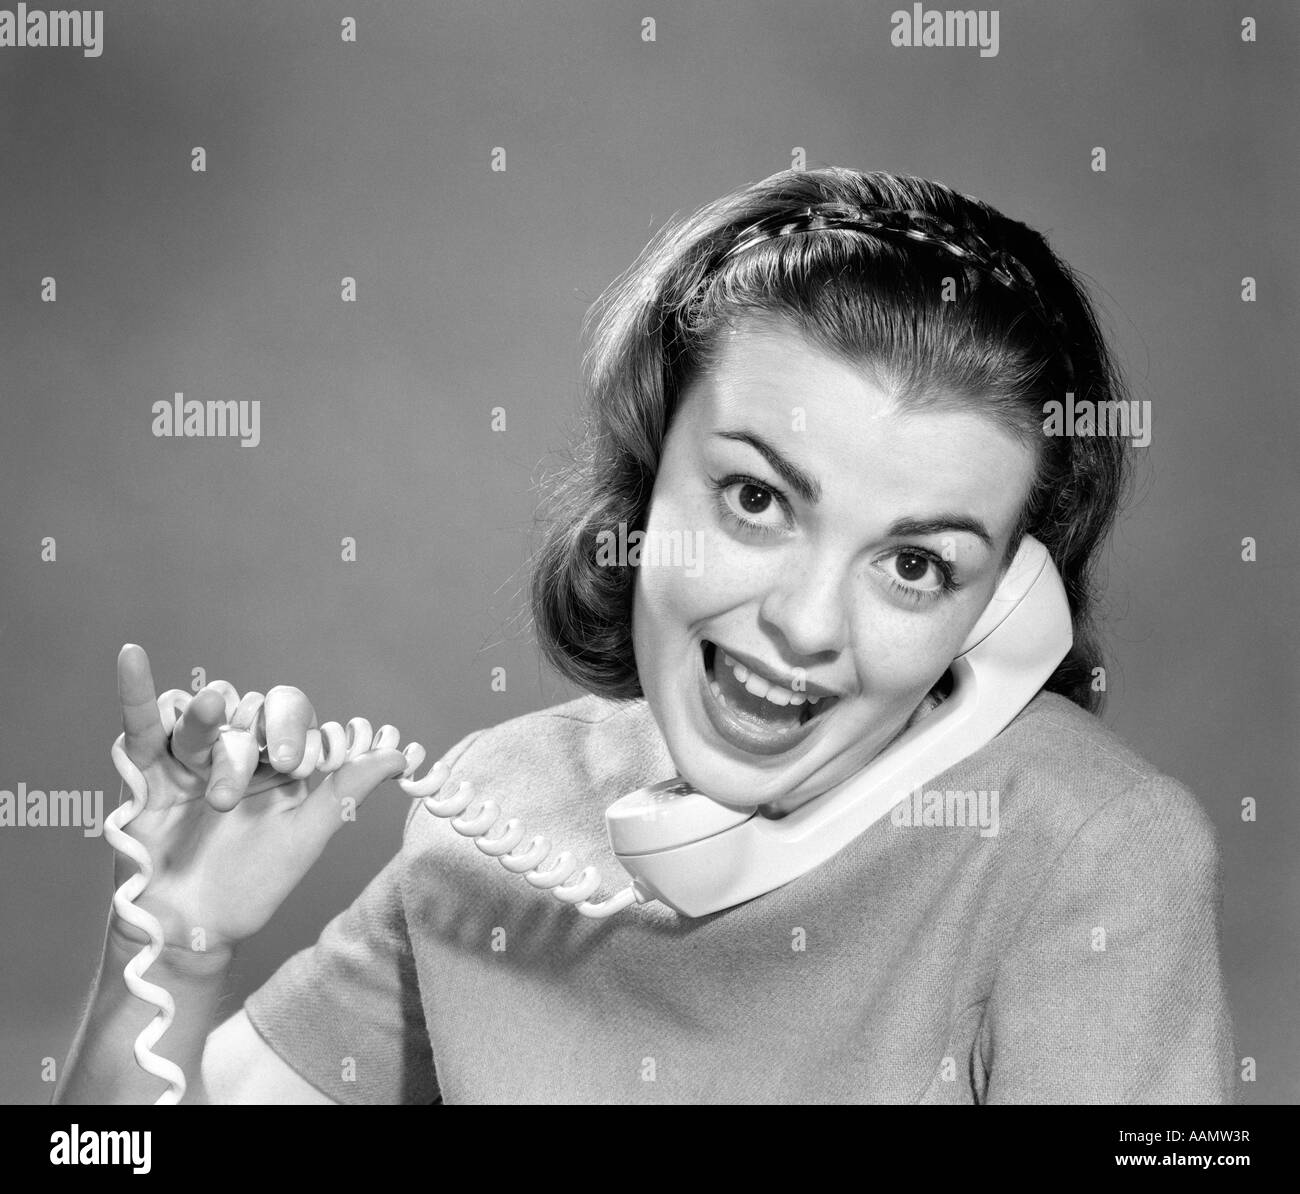 1950s 1960s YOUNG WOMAN TALKING ON TELEPHONE CORD WRAPPED IN FINGERS LOOKING AT CAMERA Stock Photo